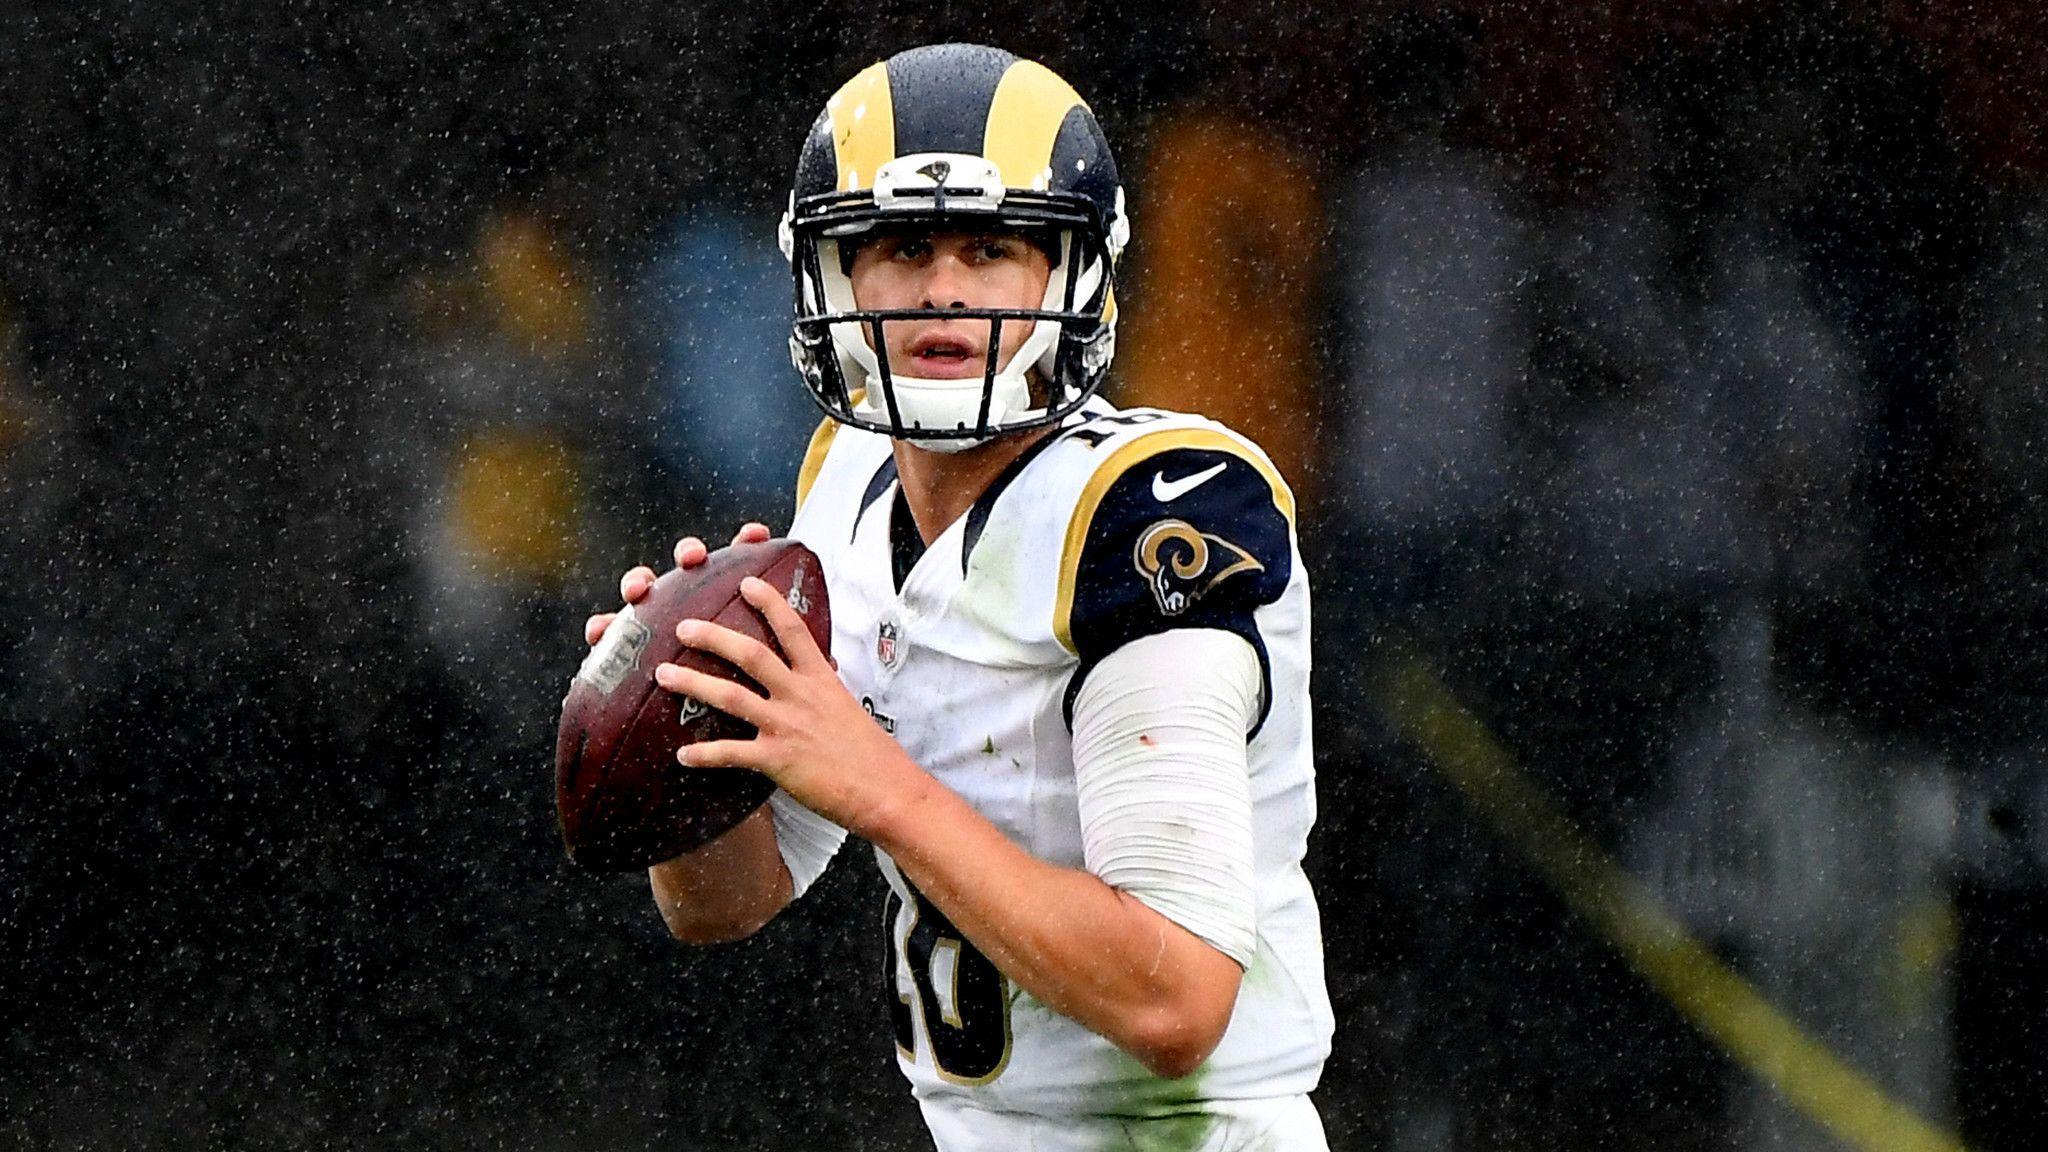 Jared Goff makes his debut, but the Rams don't really let him play